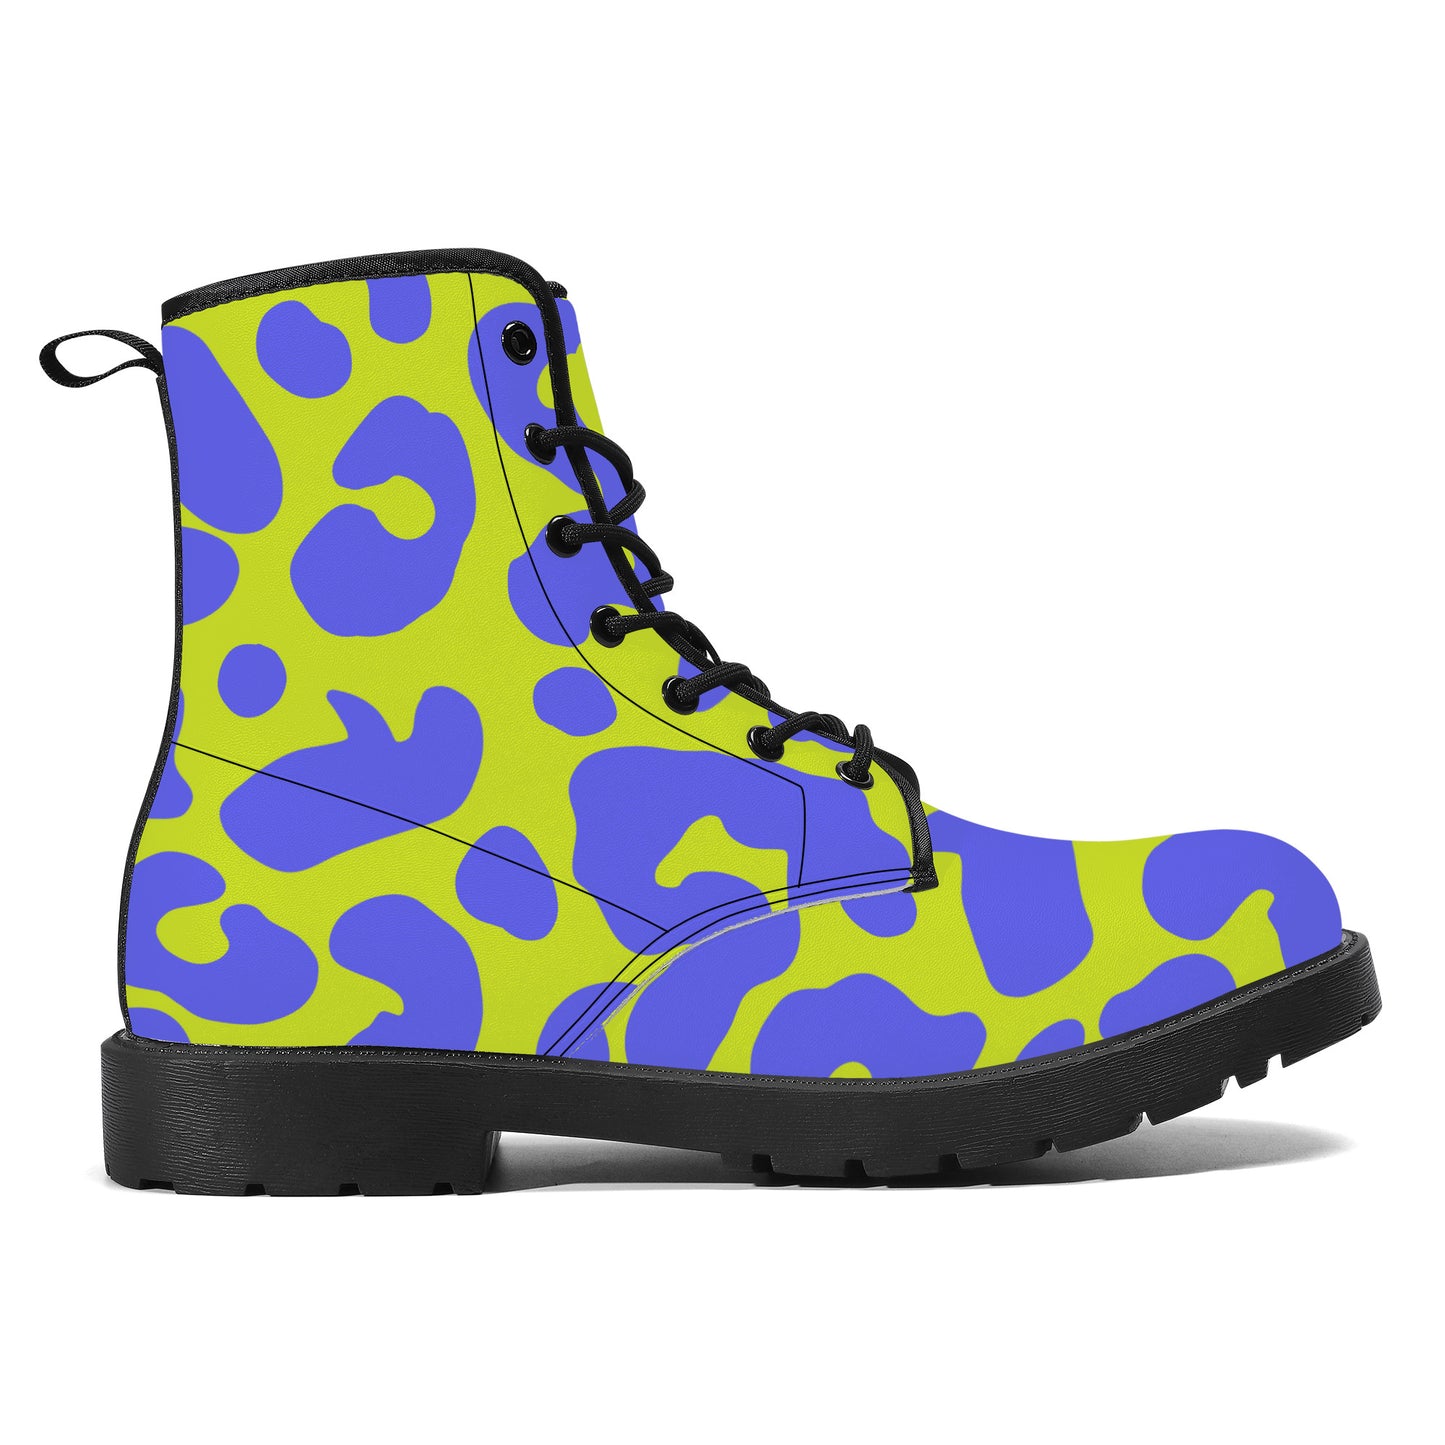 "Leopard" Eco-friendly Boots